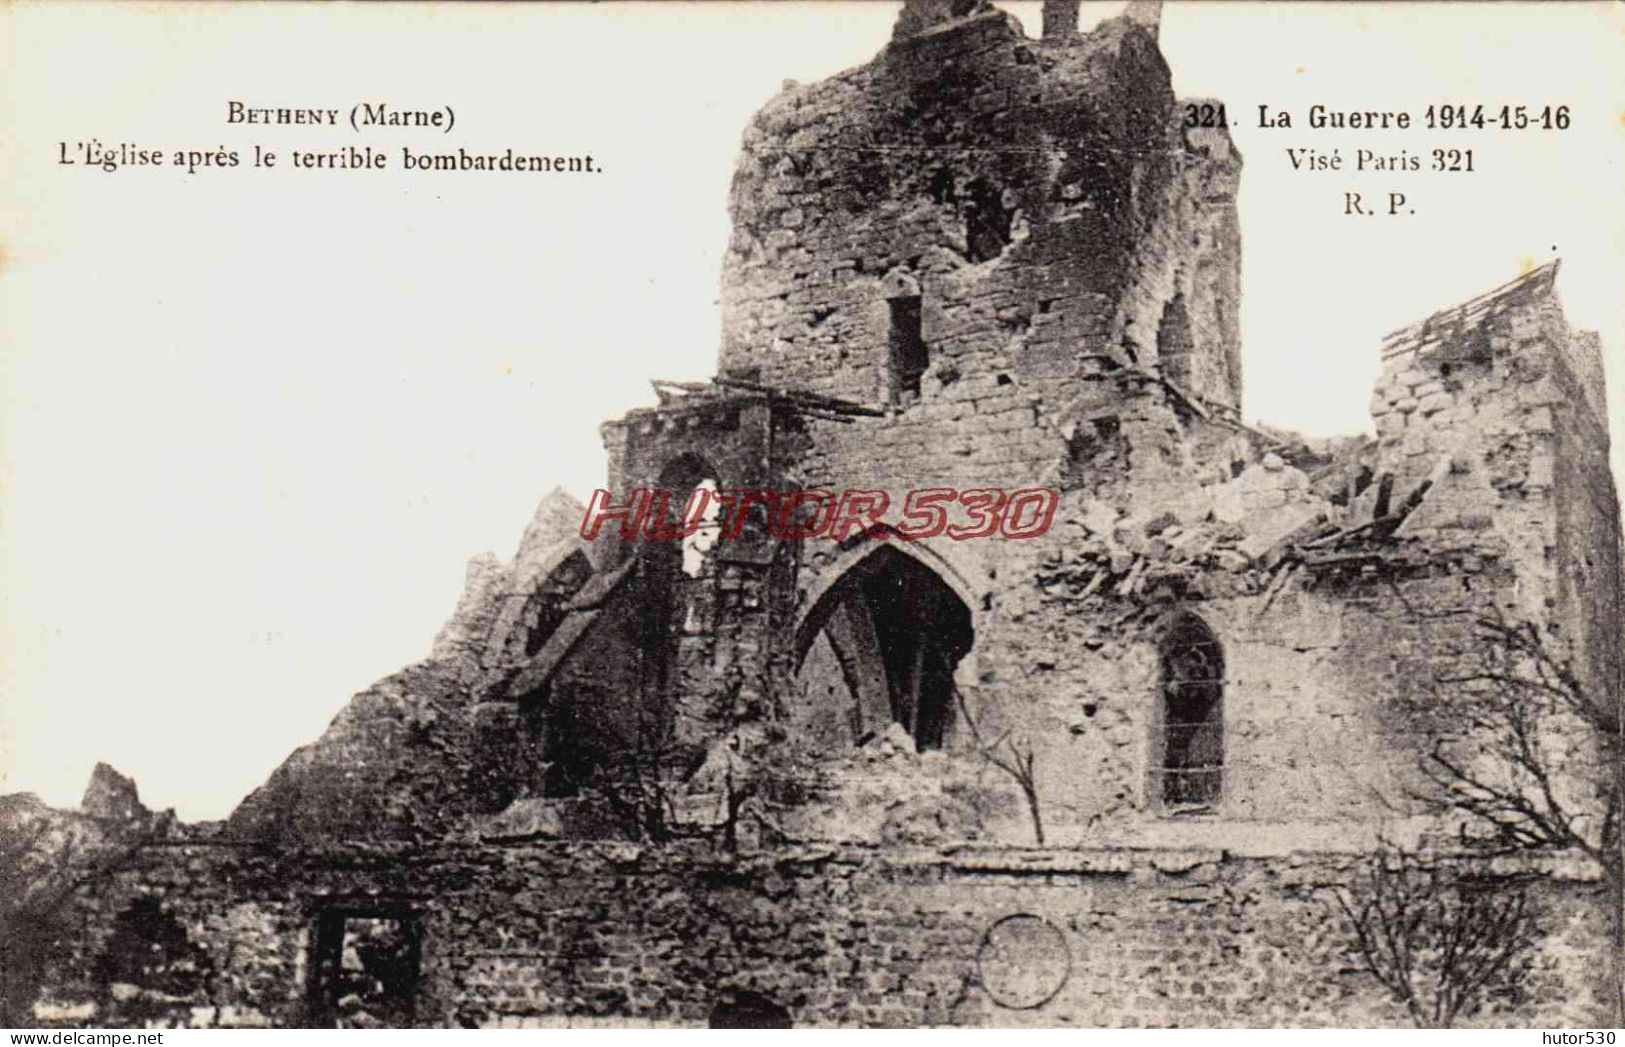 CPA BETHENY - MARNE - RUINES GUERRE 1914-18 - L'EGLISE - Bétheny